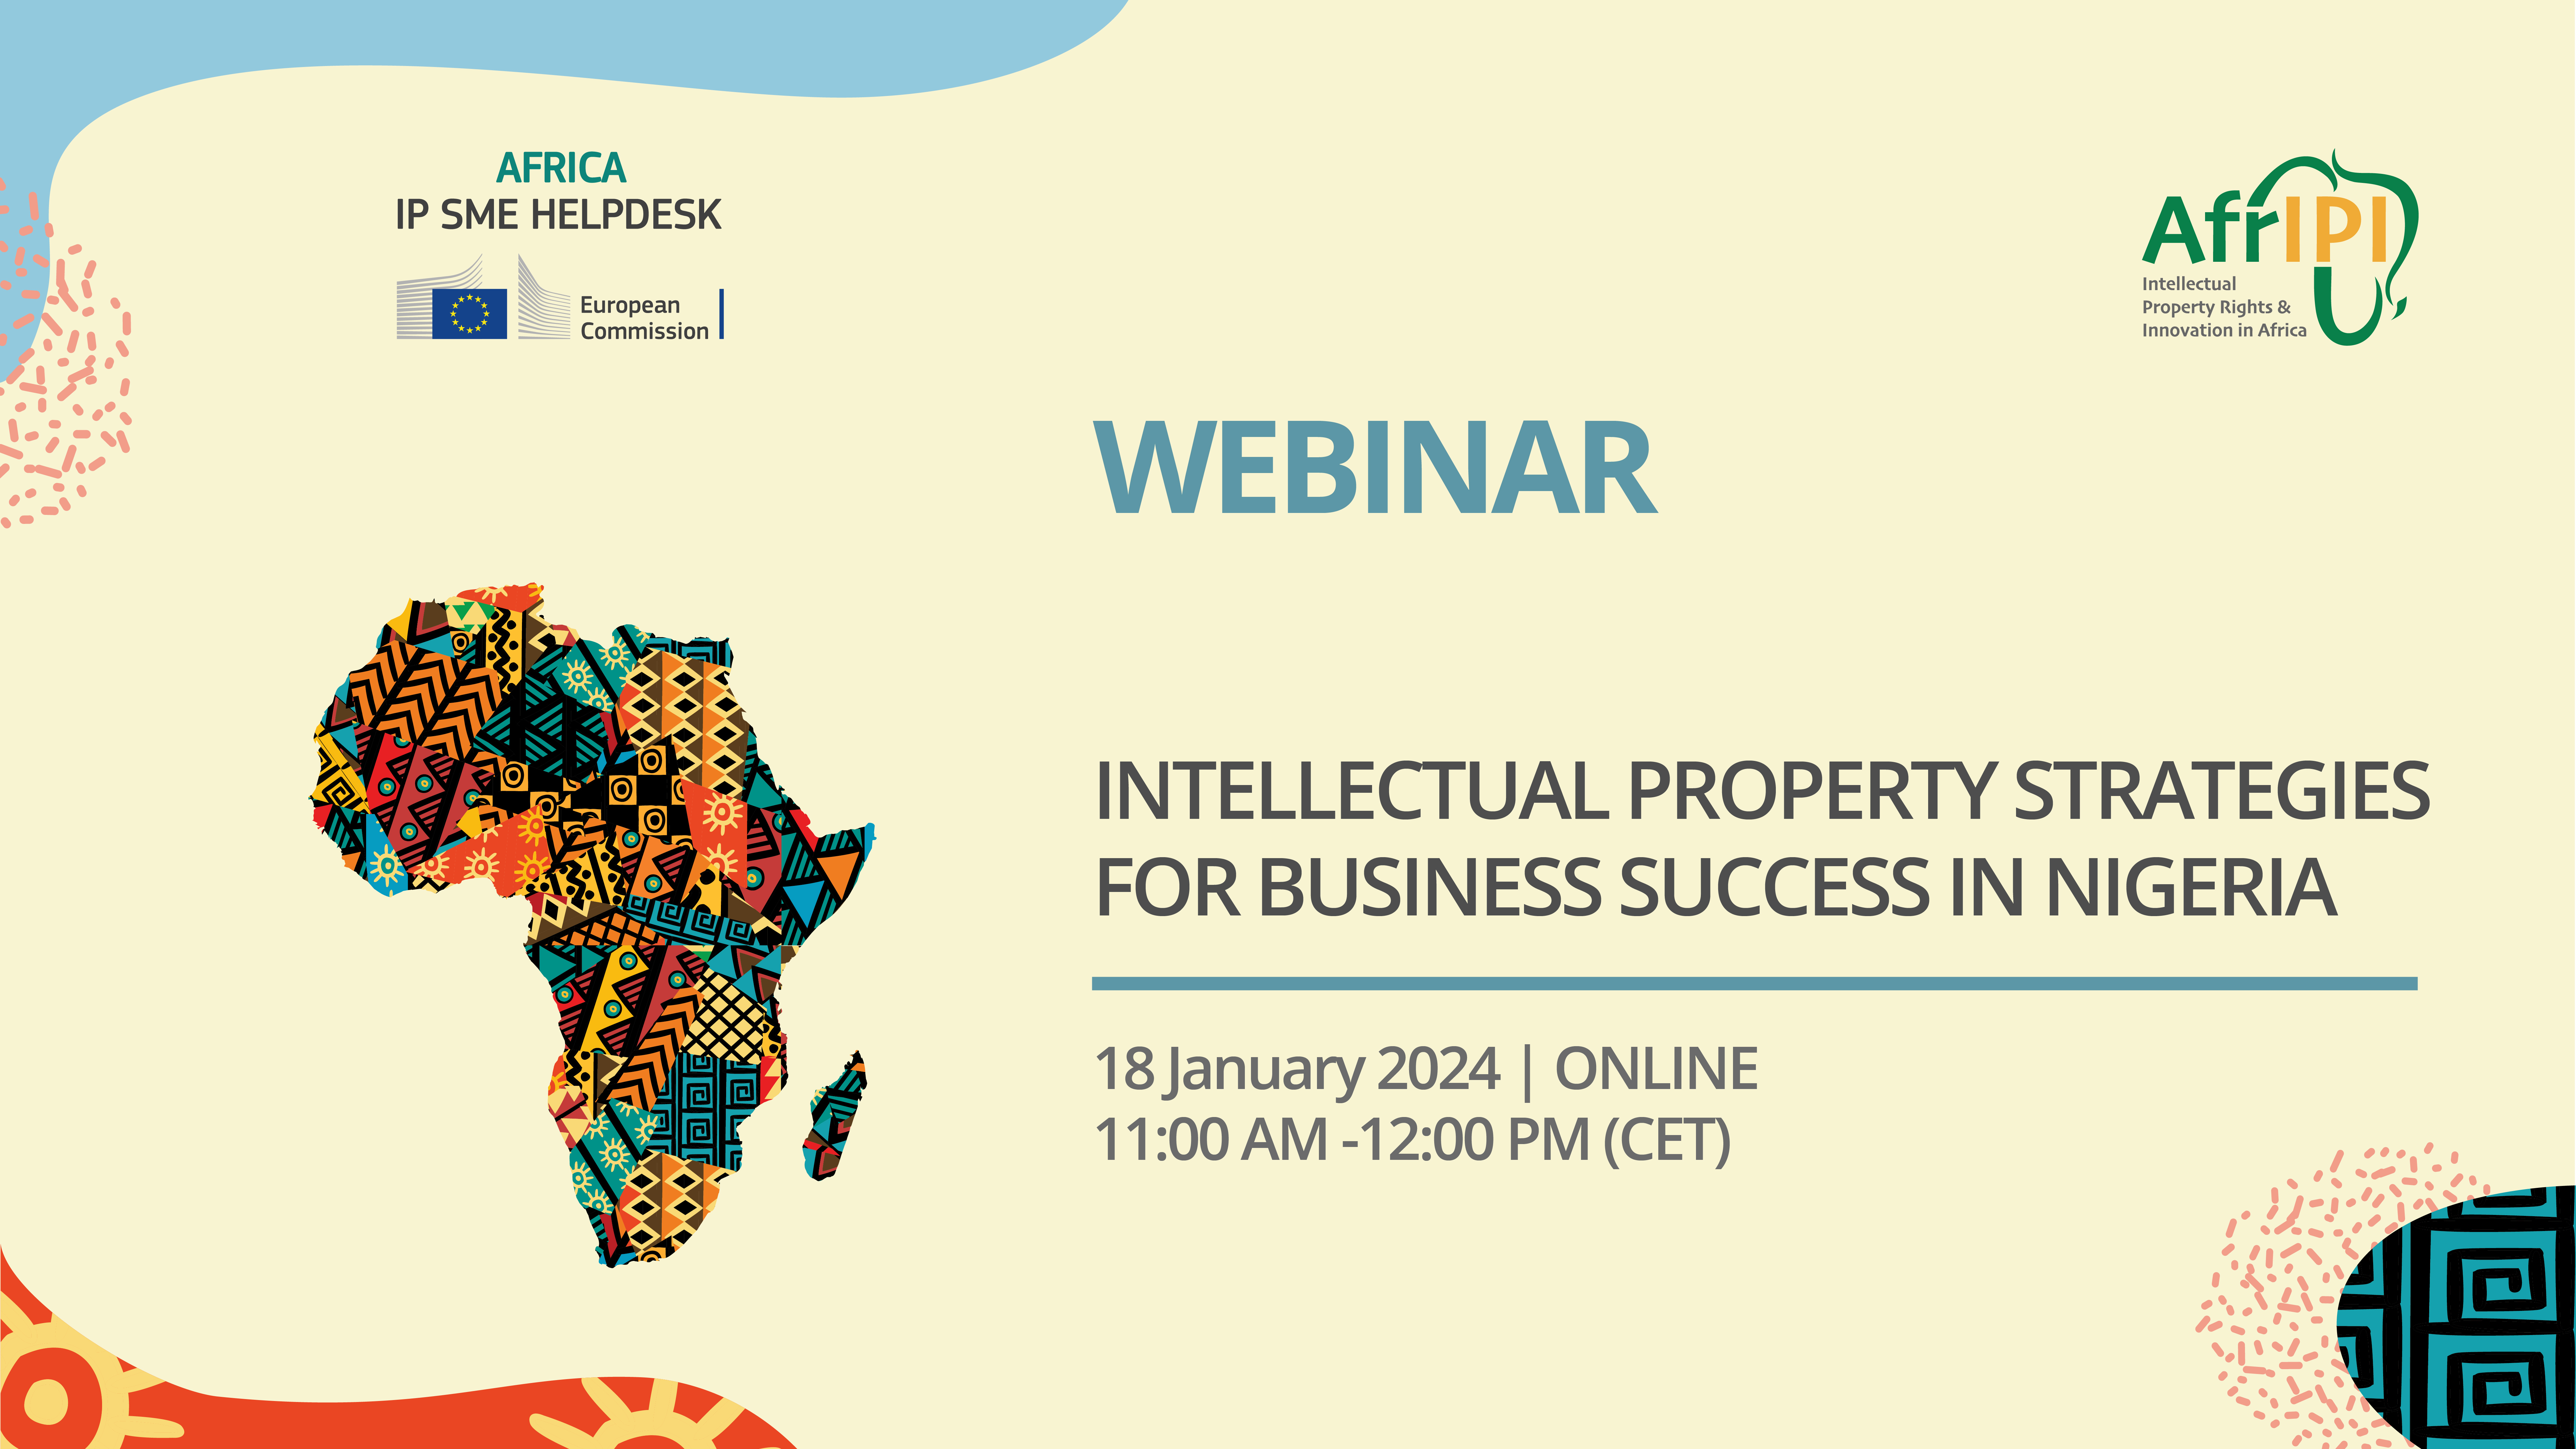 Intellectual property strategies for business success in Nigeria